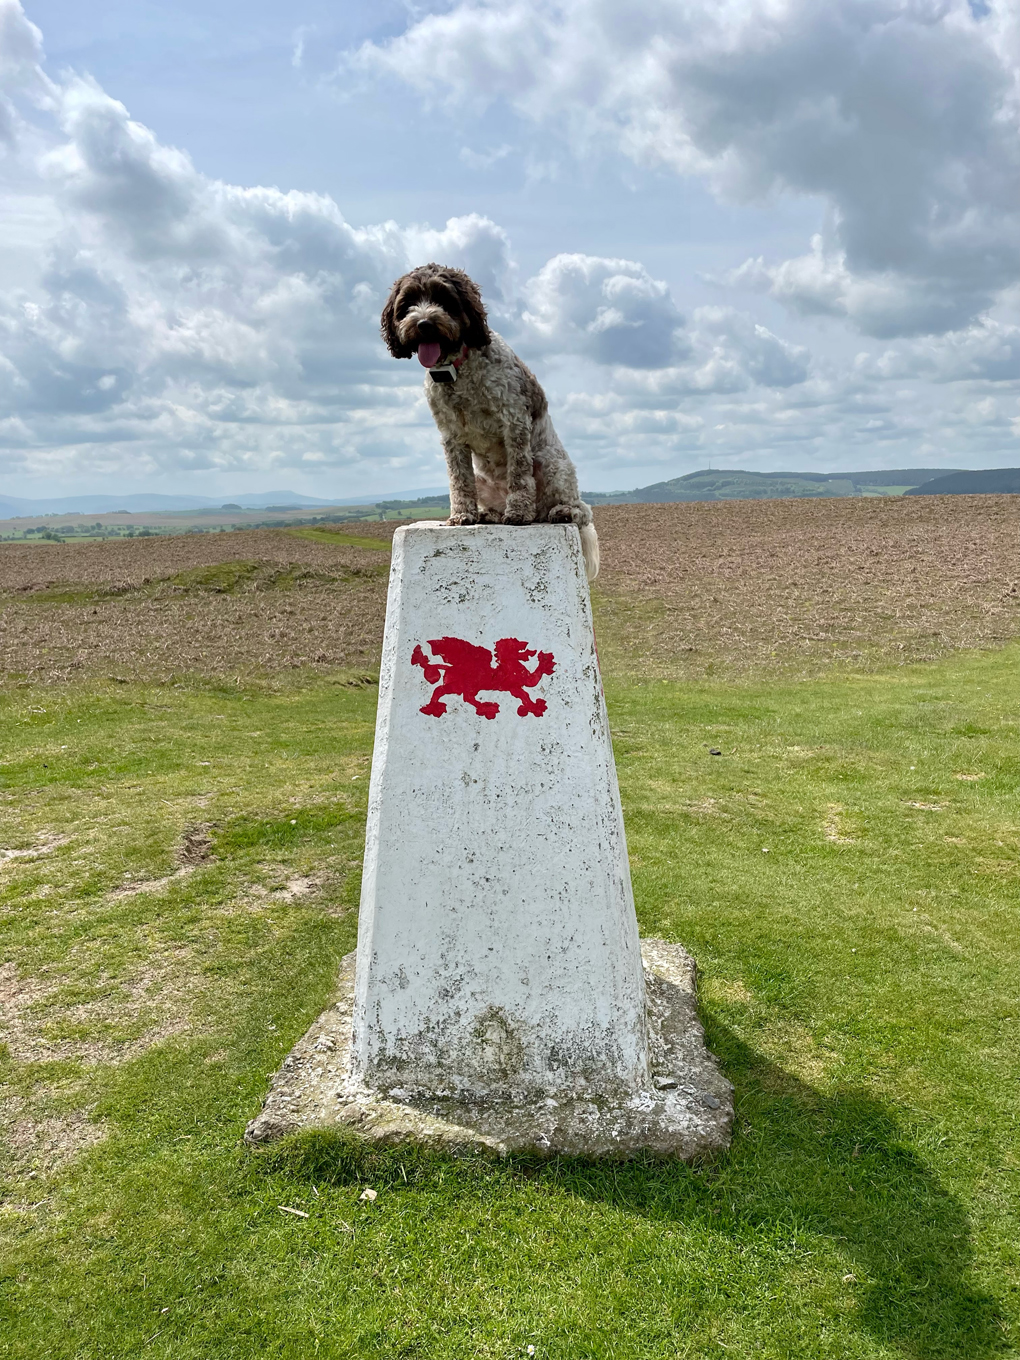 Brown and white dog sitting on top of a navigation trig point on top of a hill